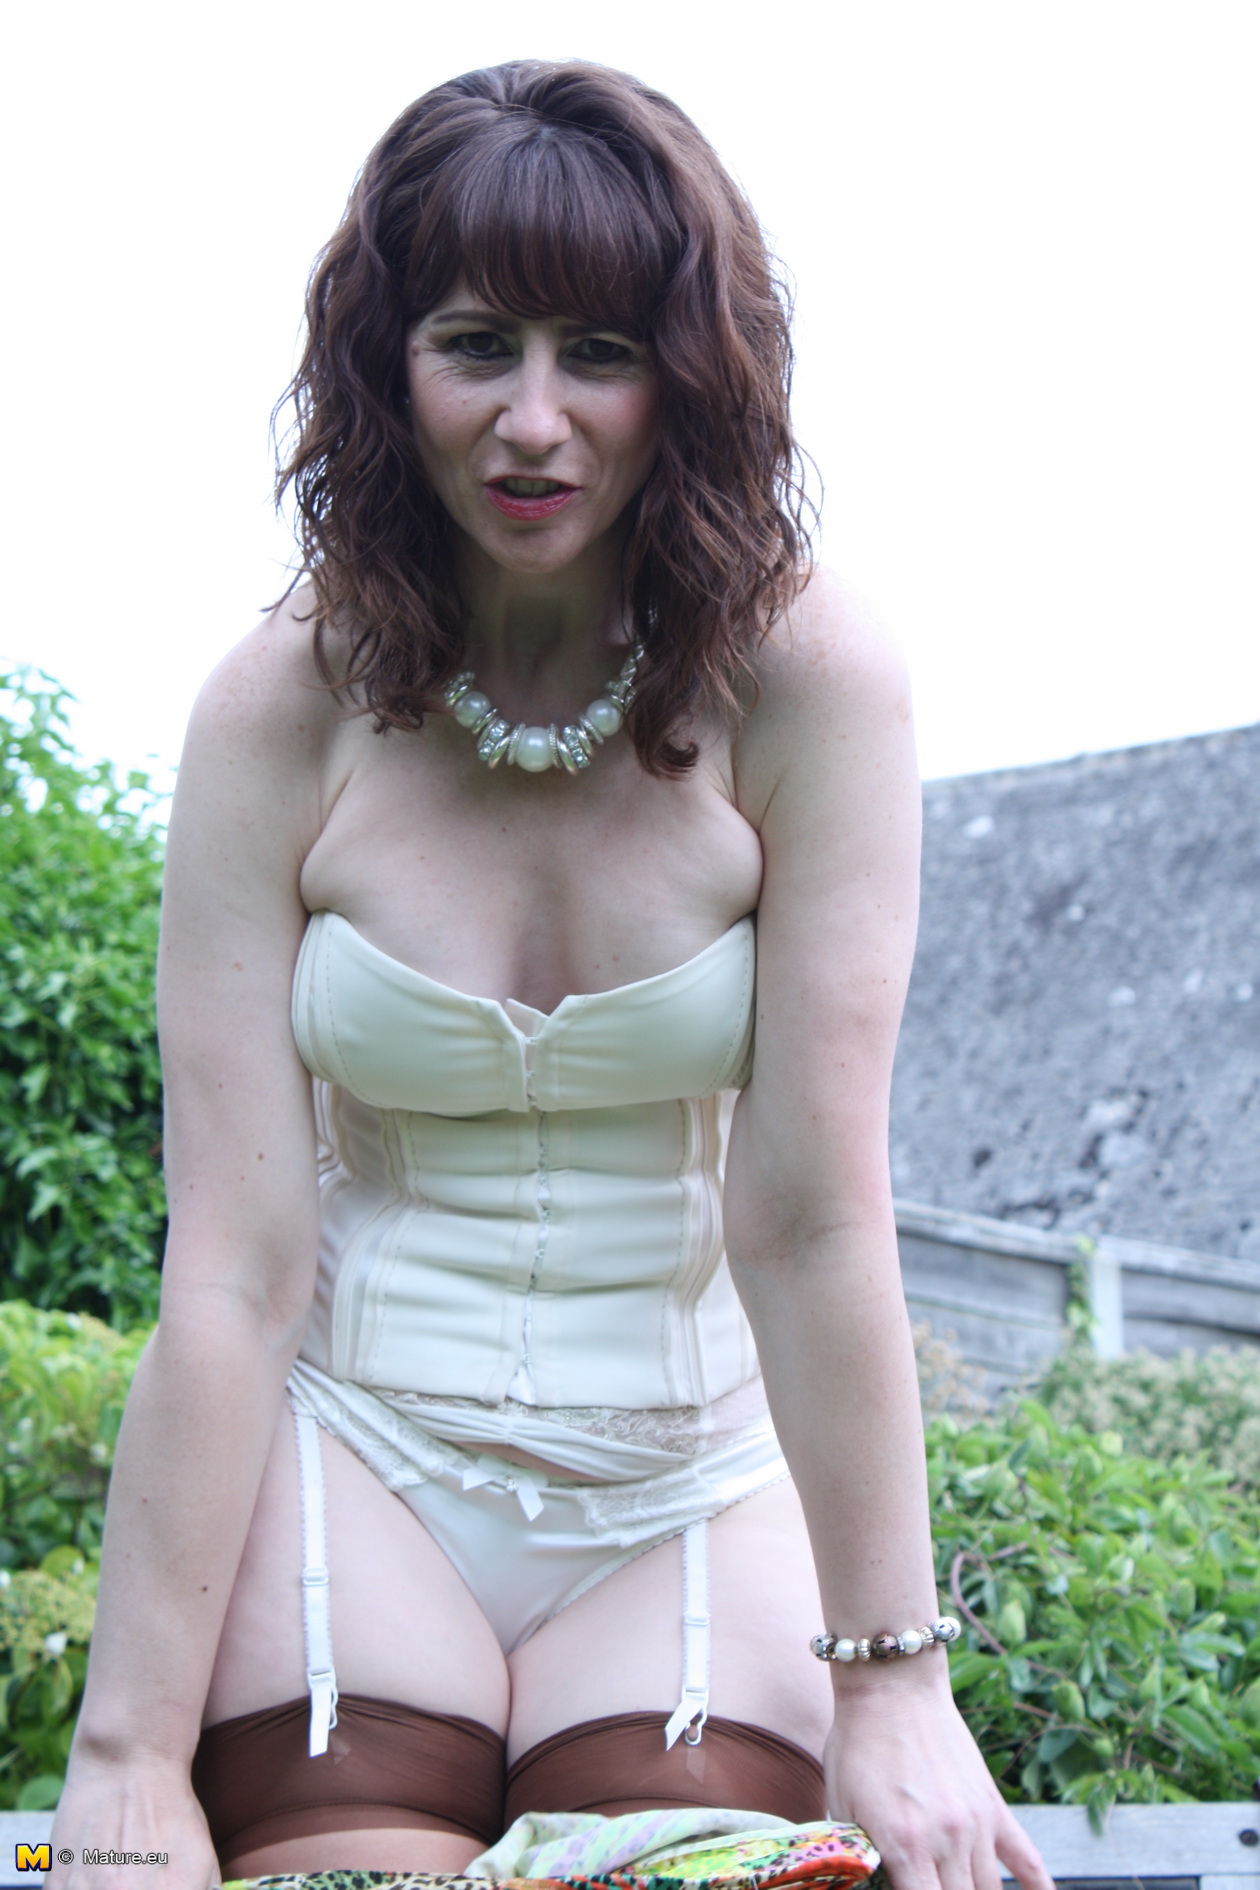 Horny British housewife playing in the garden pic